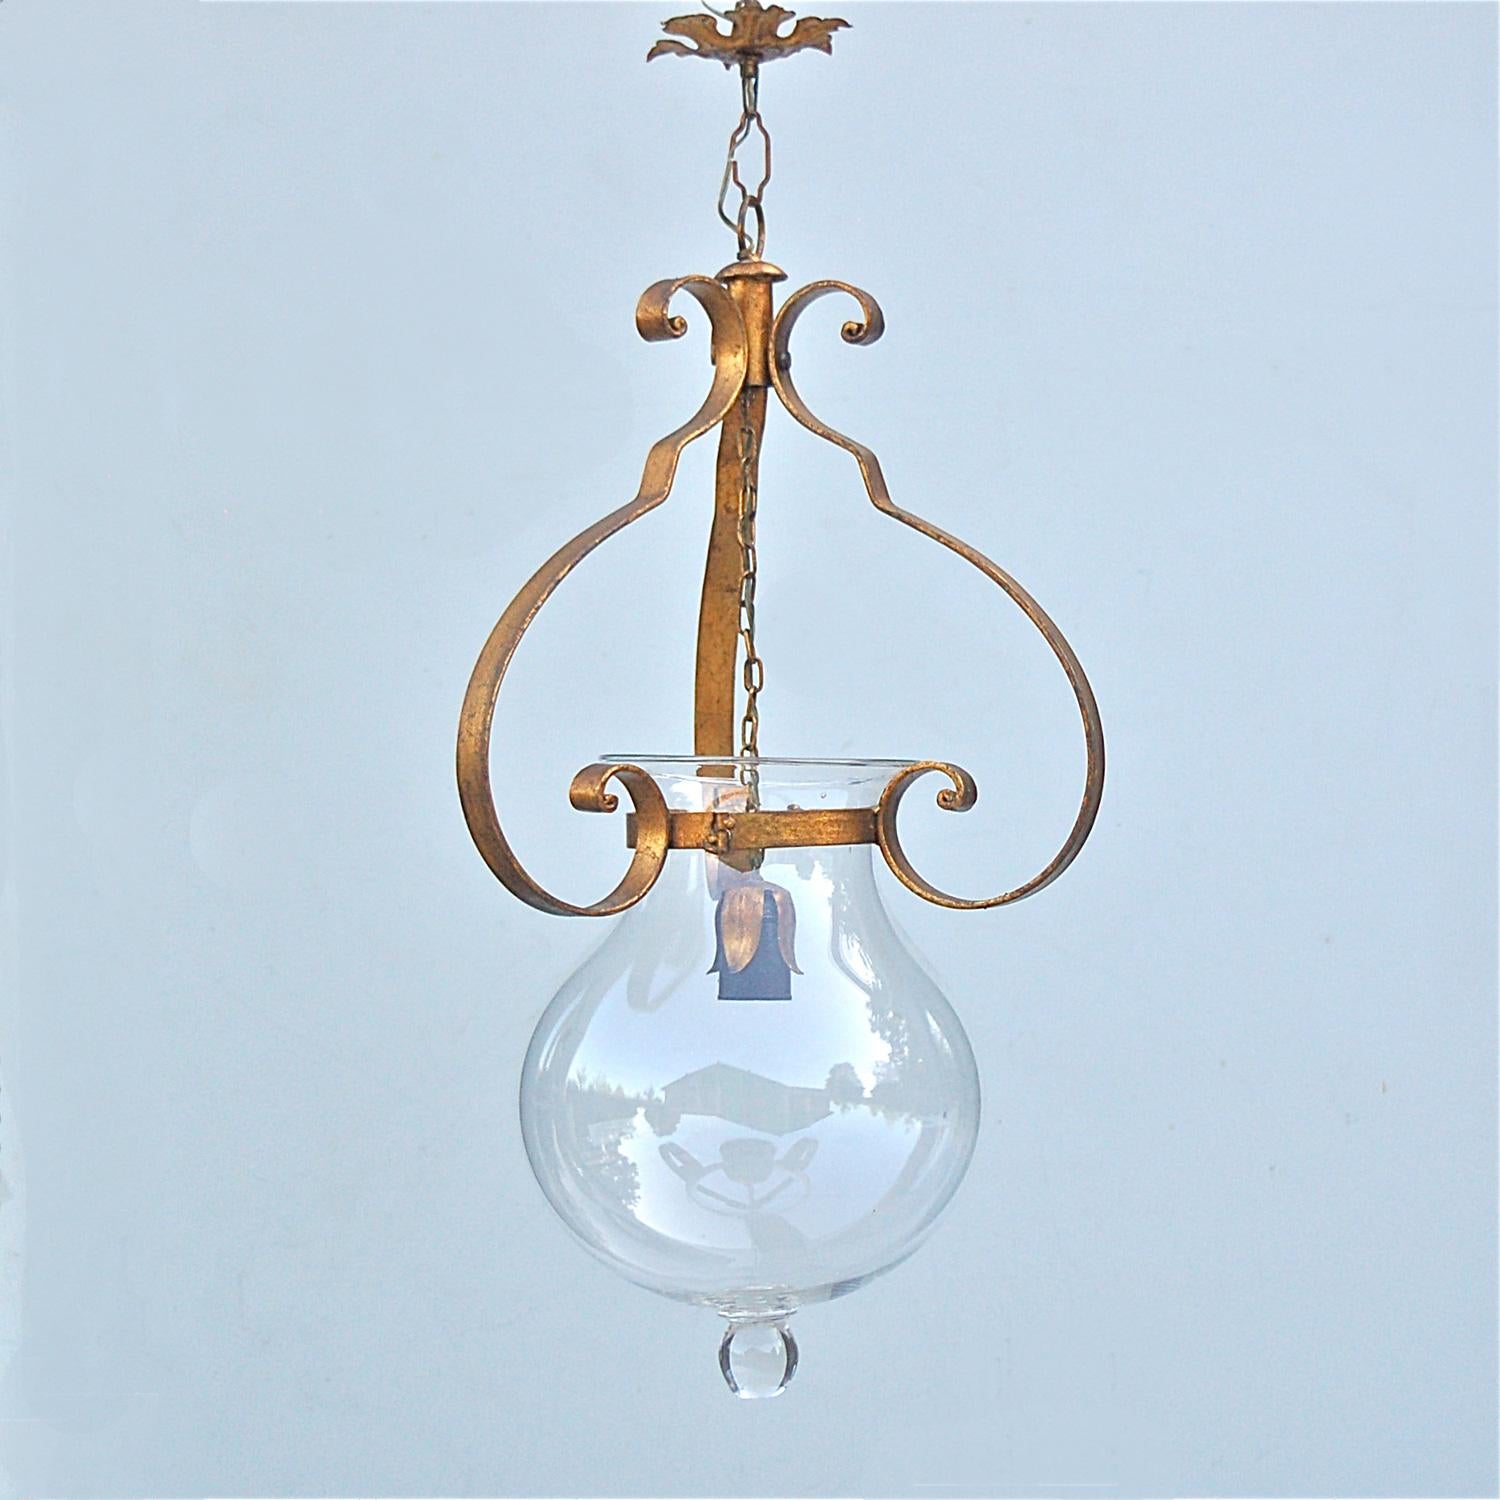 An Italian bell jar pendant or hallway lamp. The design is Inspired by the antique hall lantern. A thick, clear, bell jar shaped piece of glass sits in a metal ring attached to three broad, swirling, curved metal bands or arms with an antique gold